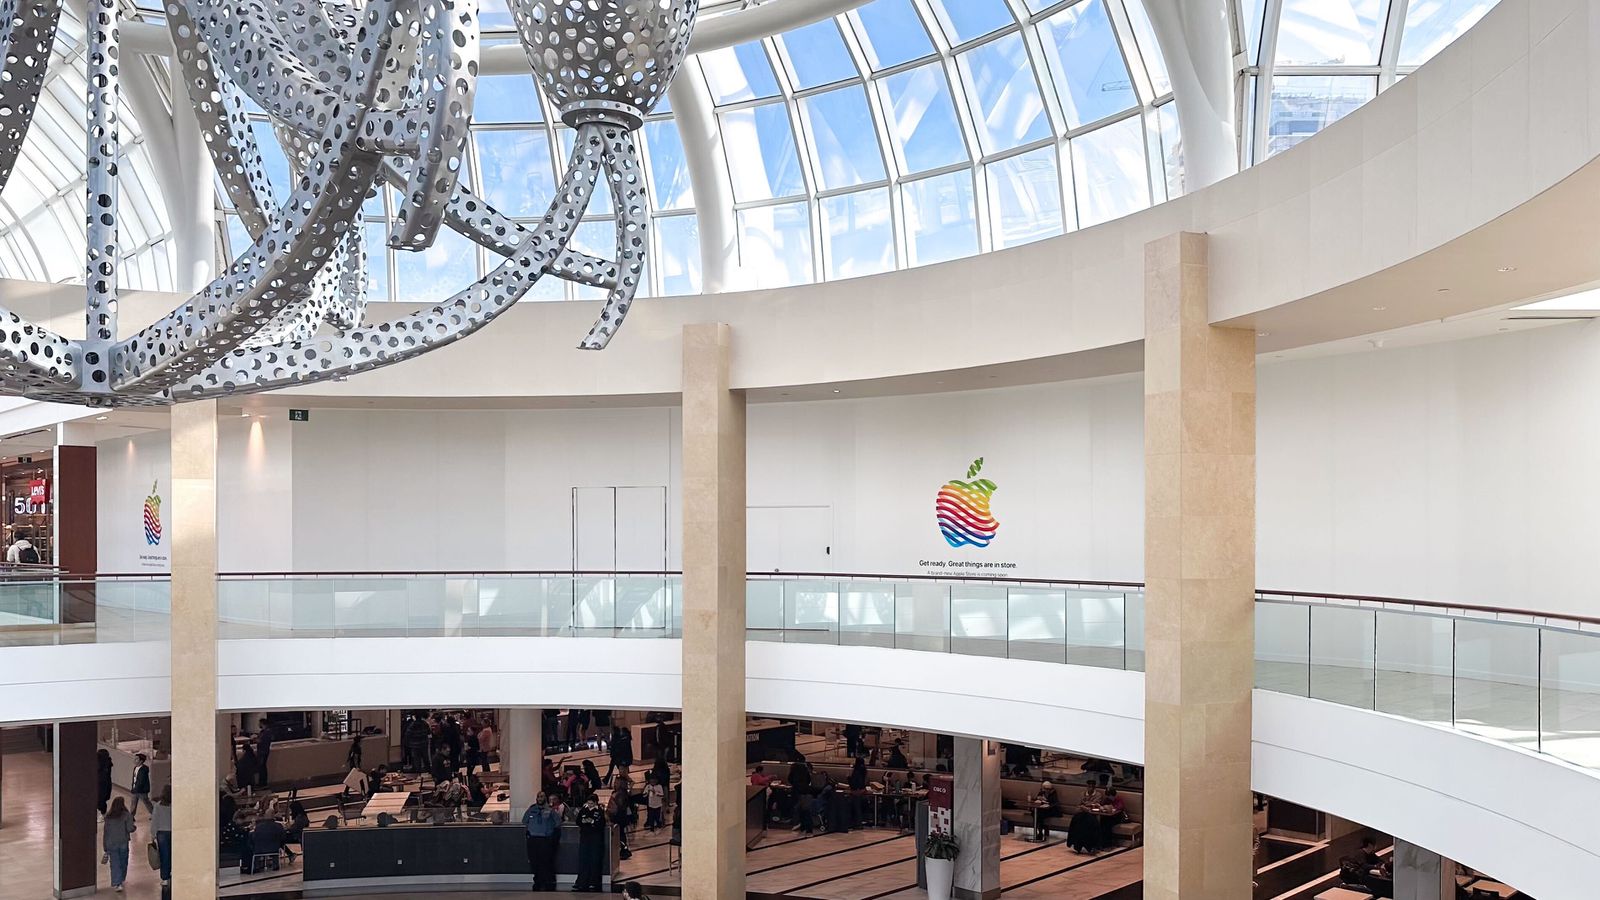 Apple Teases New Store 'Coming Soon' at Square One Mall Near Toronto -  MacRumors